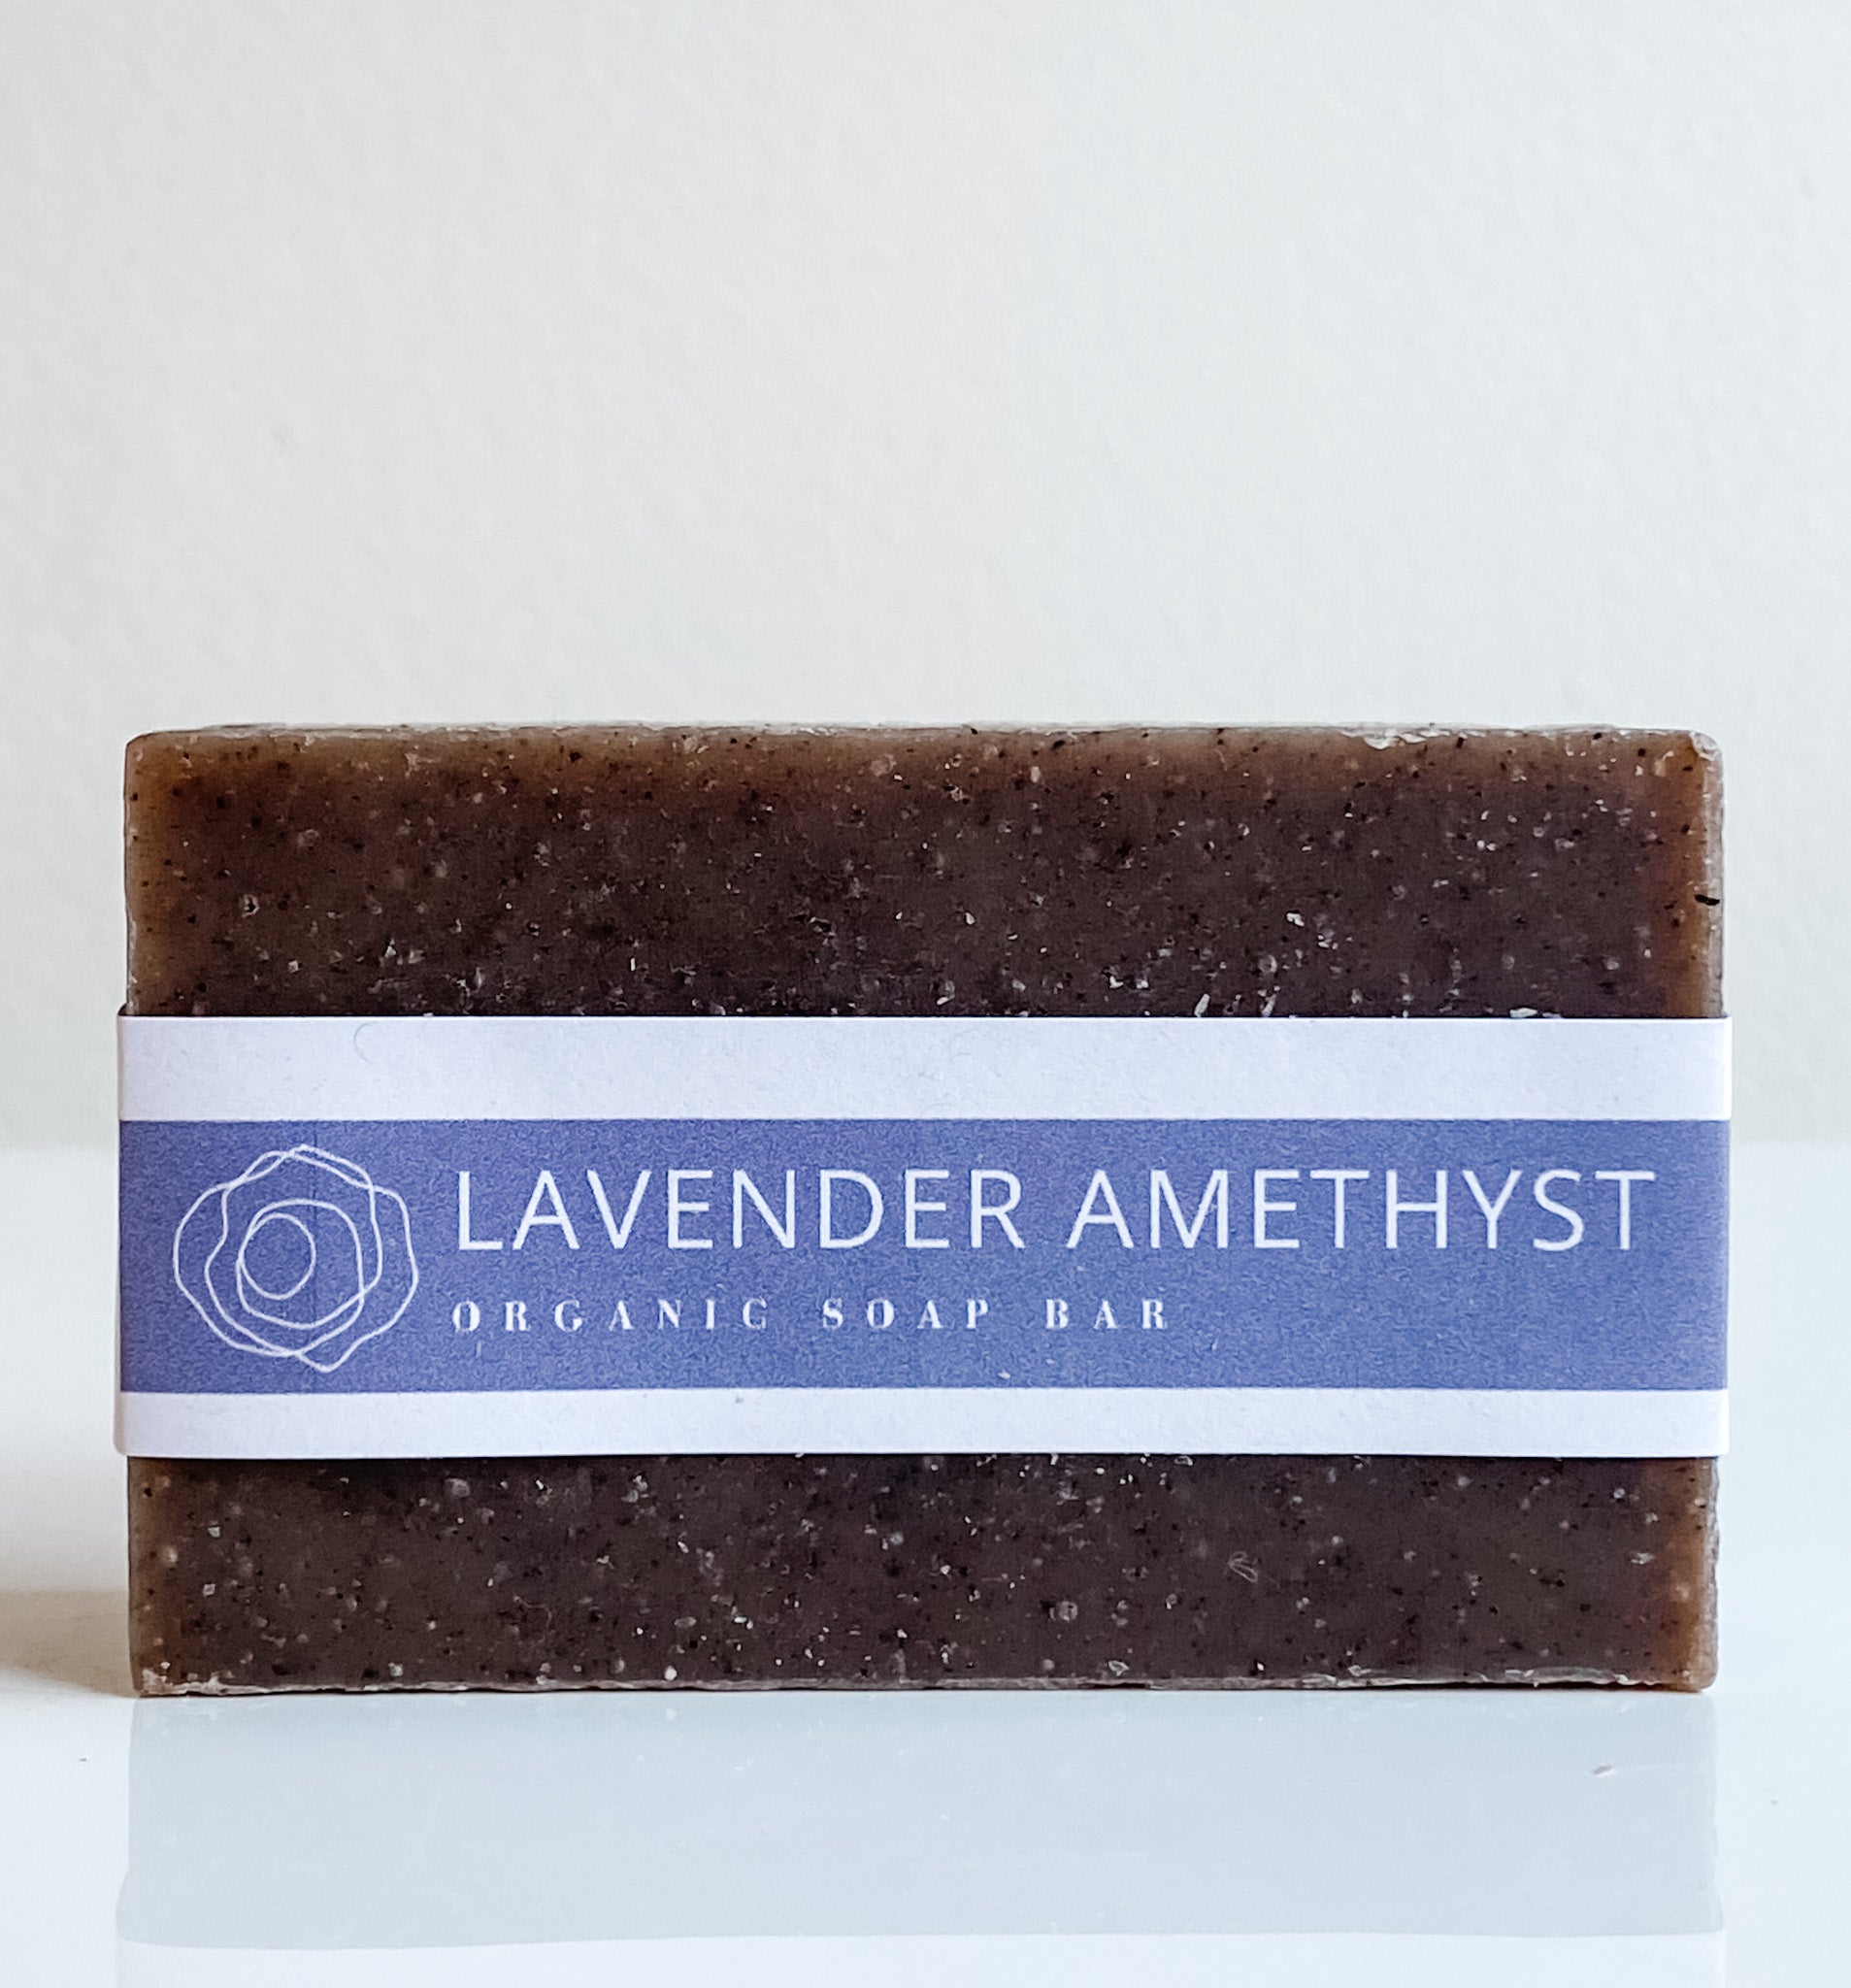 Lavender Amethyst Organic Soap Bar - Handmade with Natural Ingredients. Hidden Forest Naturals